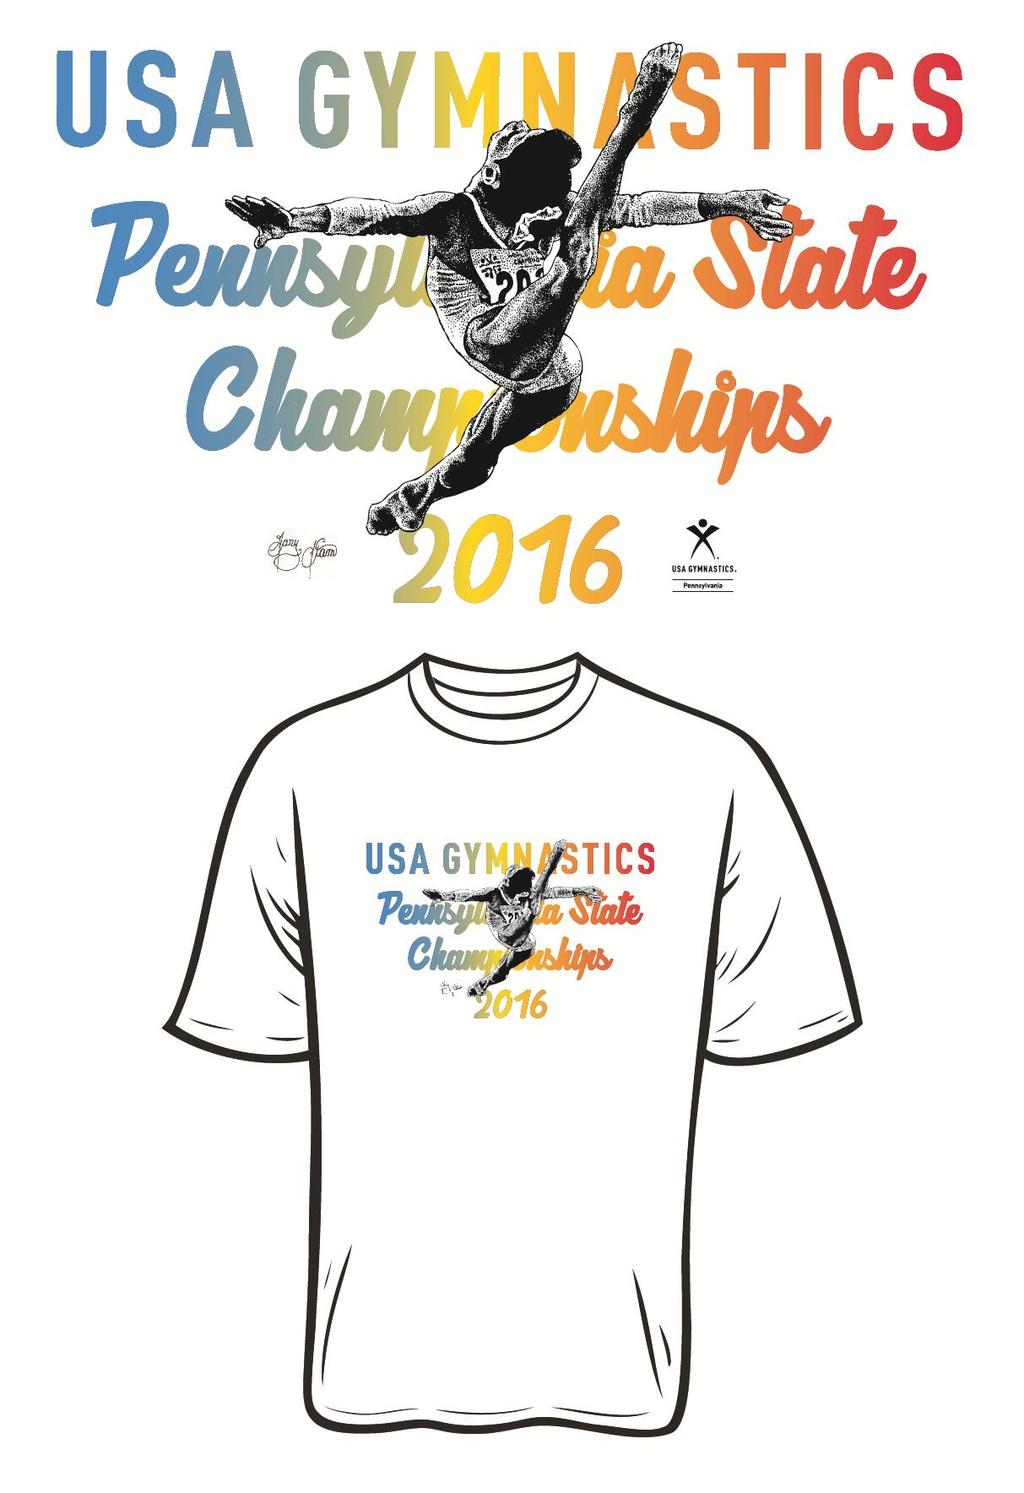 Official Pennsylvania USA Gymnastics Commemorative Shirts These Shirts are high quality, name brand apparel in a 50/50 blend.